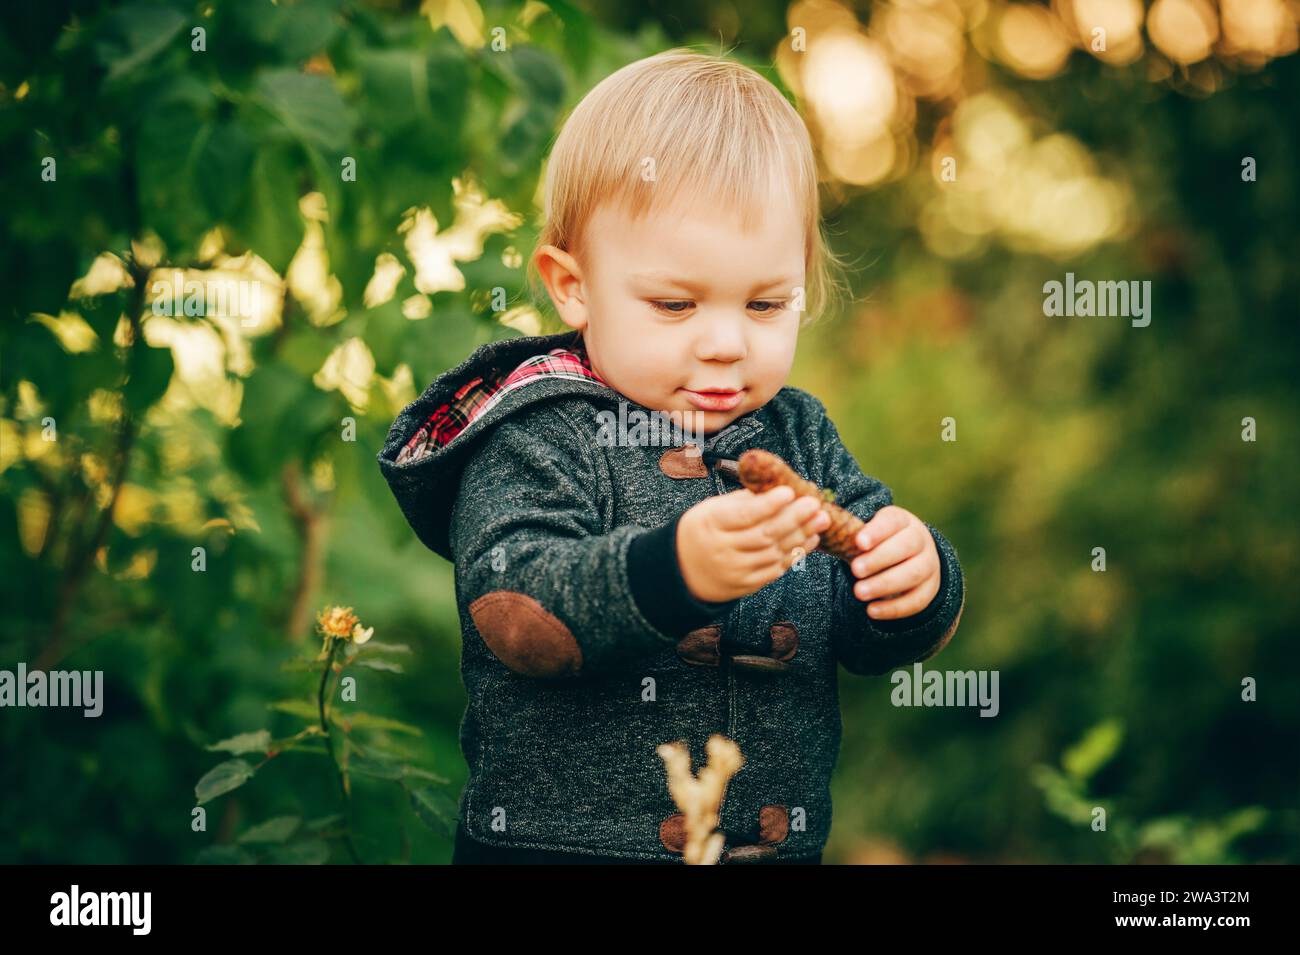 Adorable 1 year old toddler boy playing in the park on a nice sunny day Stock Photo